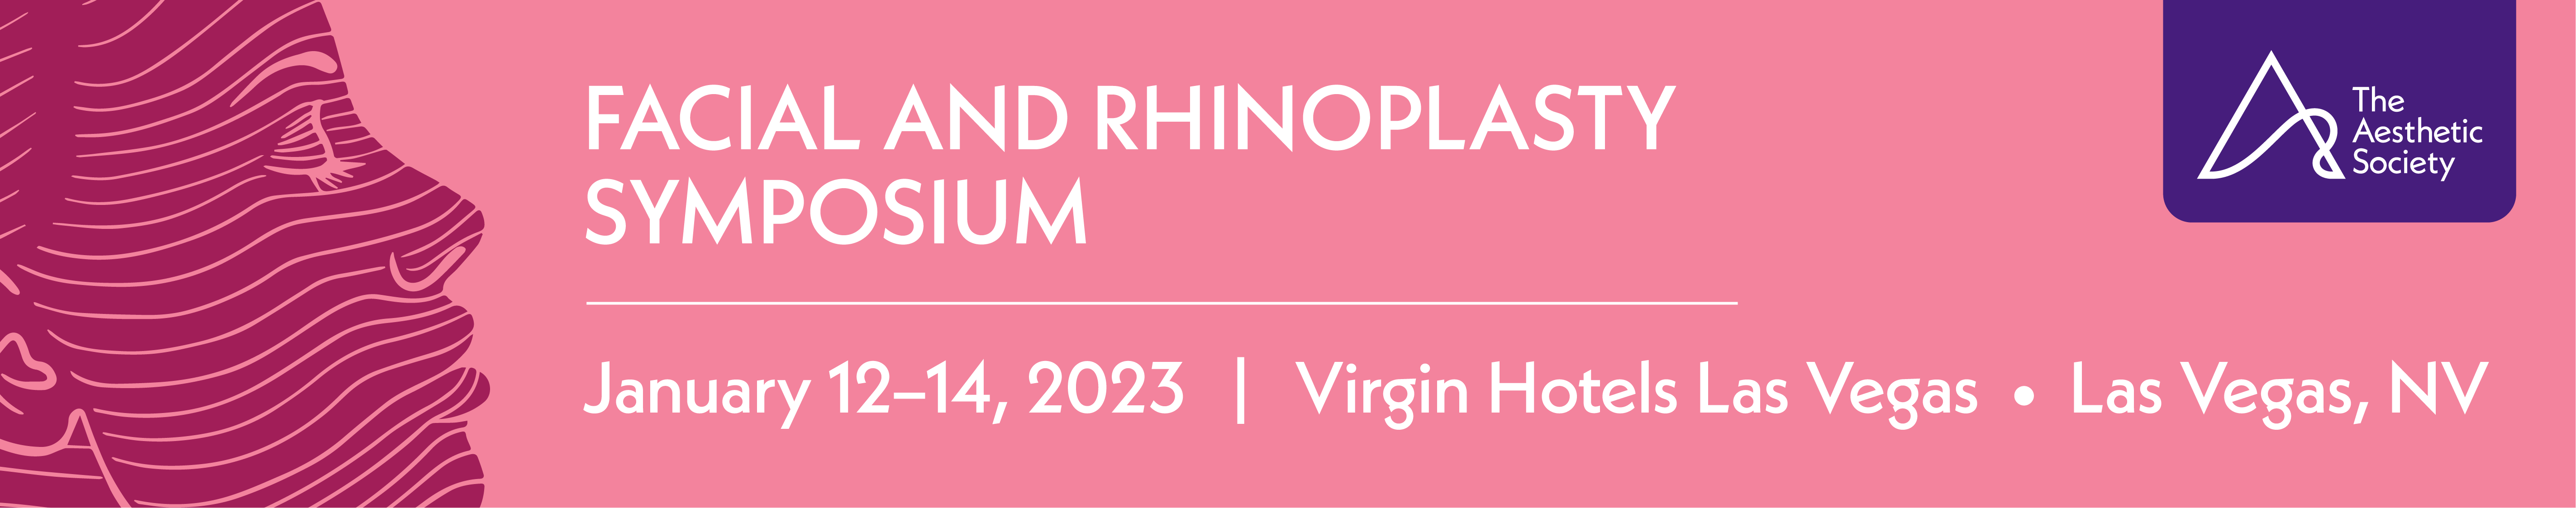 The Aesthetic Society Facial and Rhinoplasty Symposium 2023